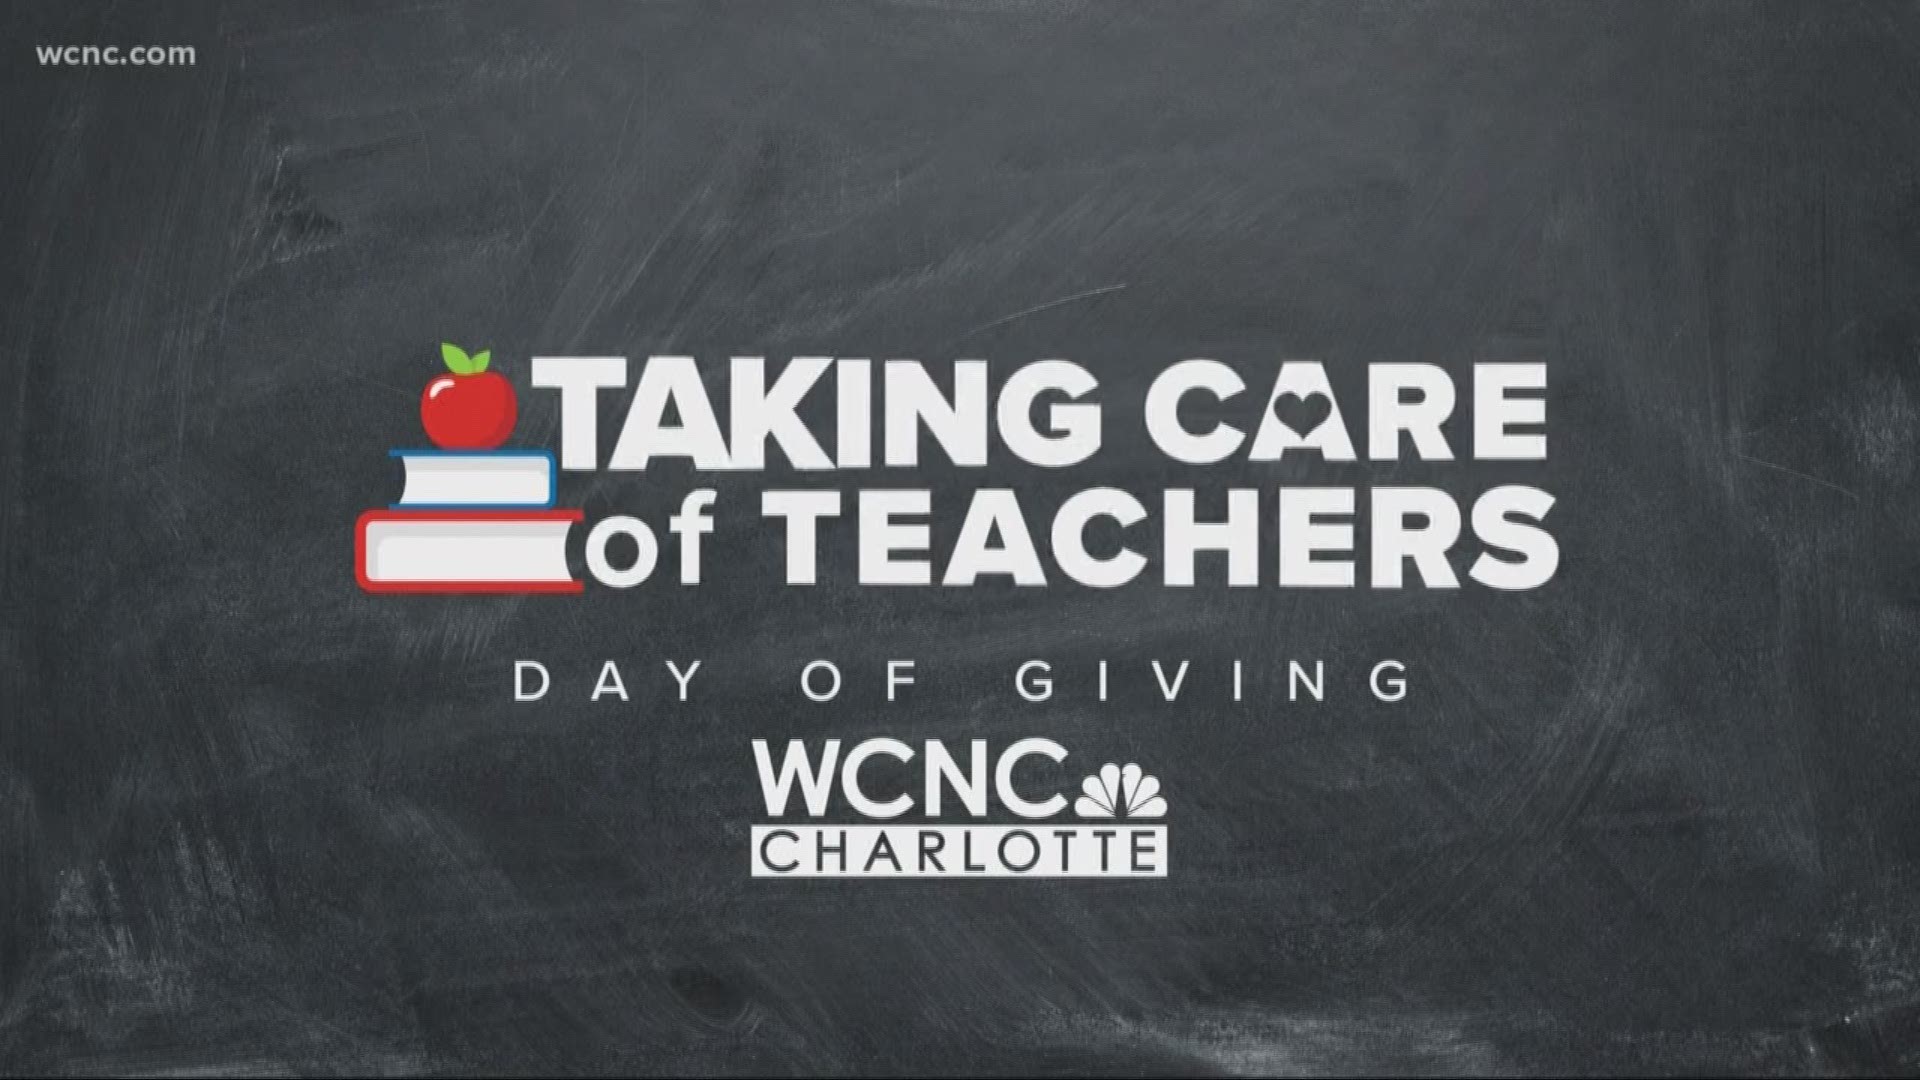 Our teachers work so hard and don't get paid nearly enough. That's why NBC Charlotte has teamed with Classroom Central to help teachers get the supplies they need for students and classrooms.